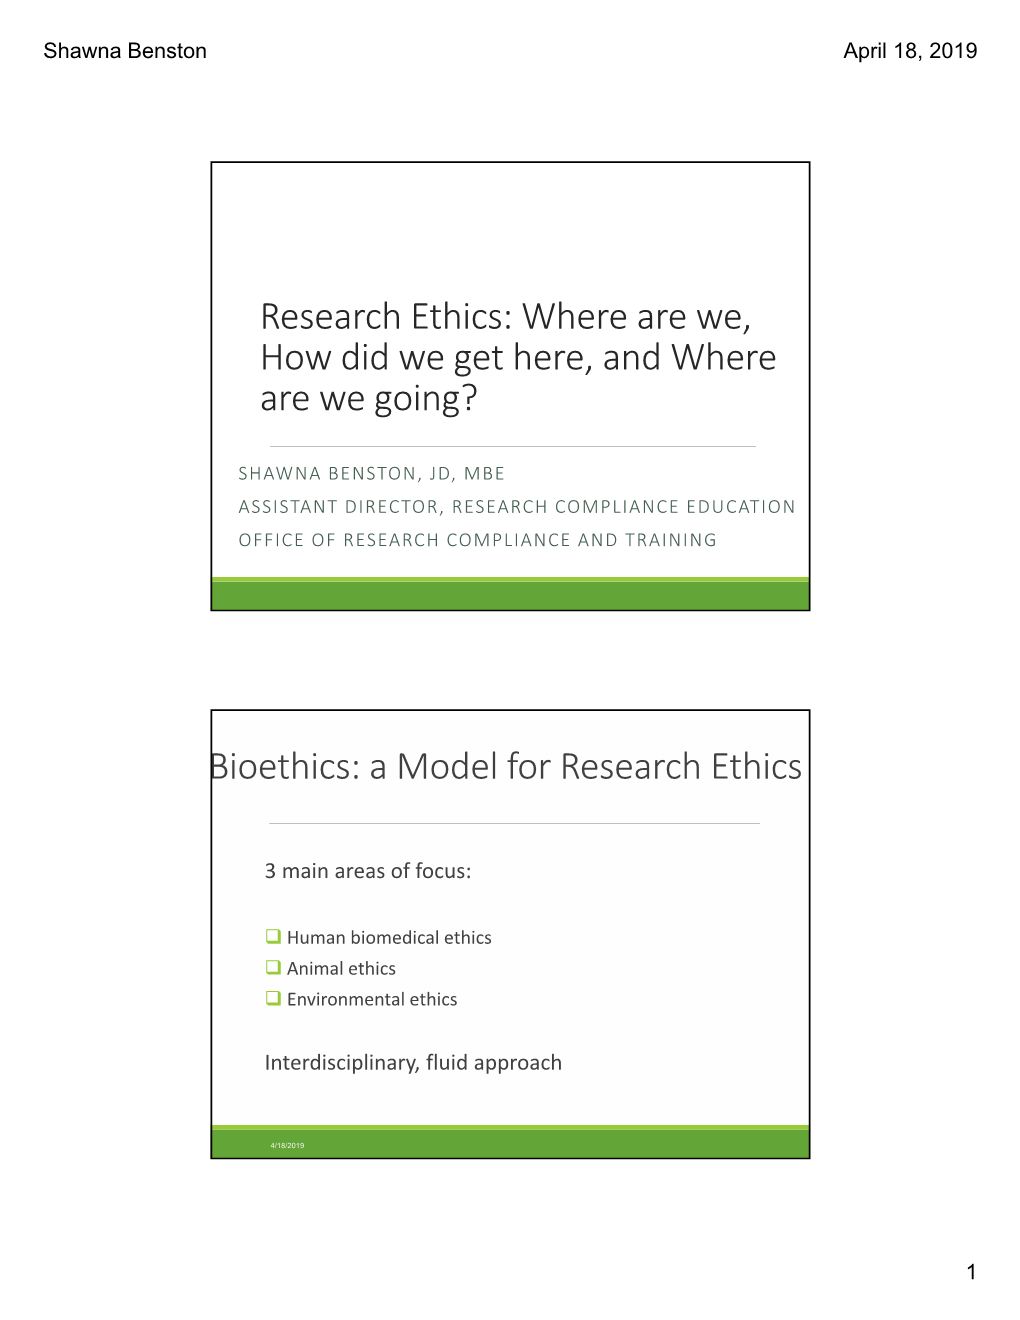 Research Ethics: Where Are We, How Did We Get Here, and Where Are We Going?